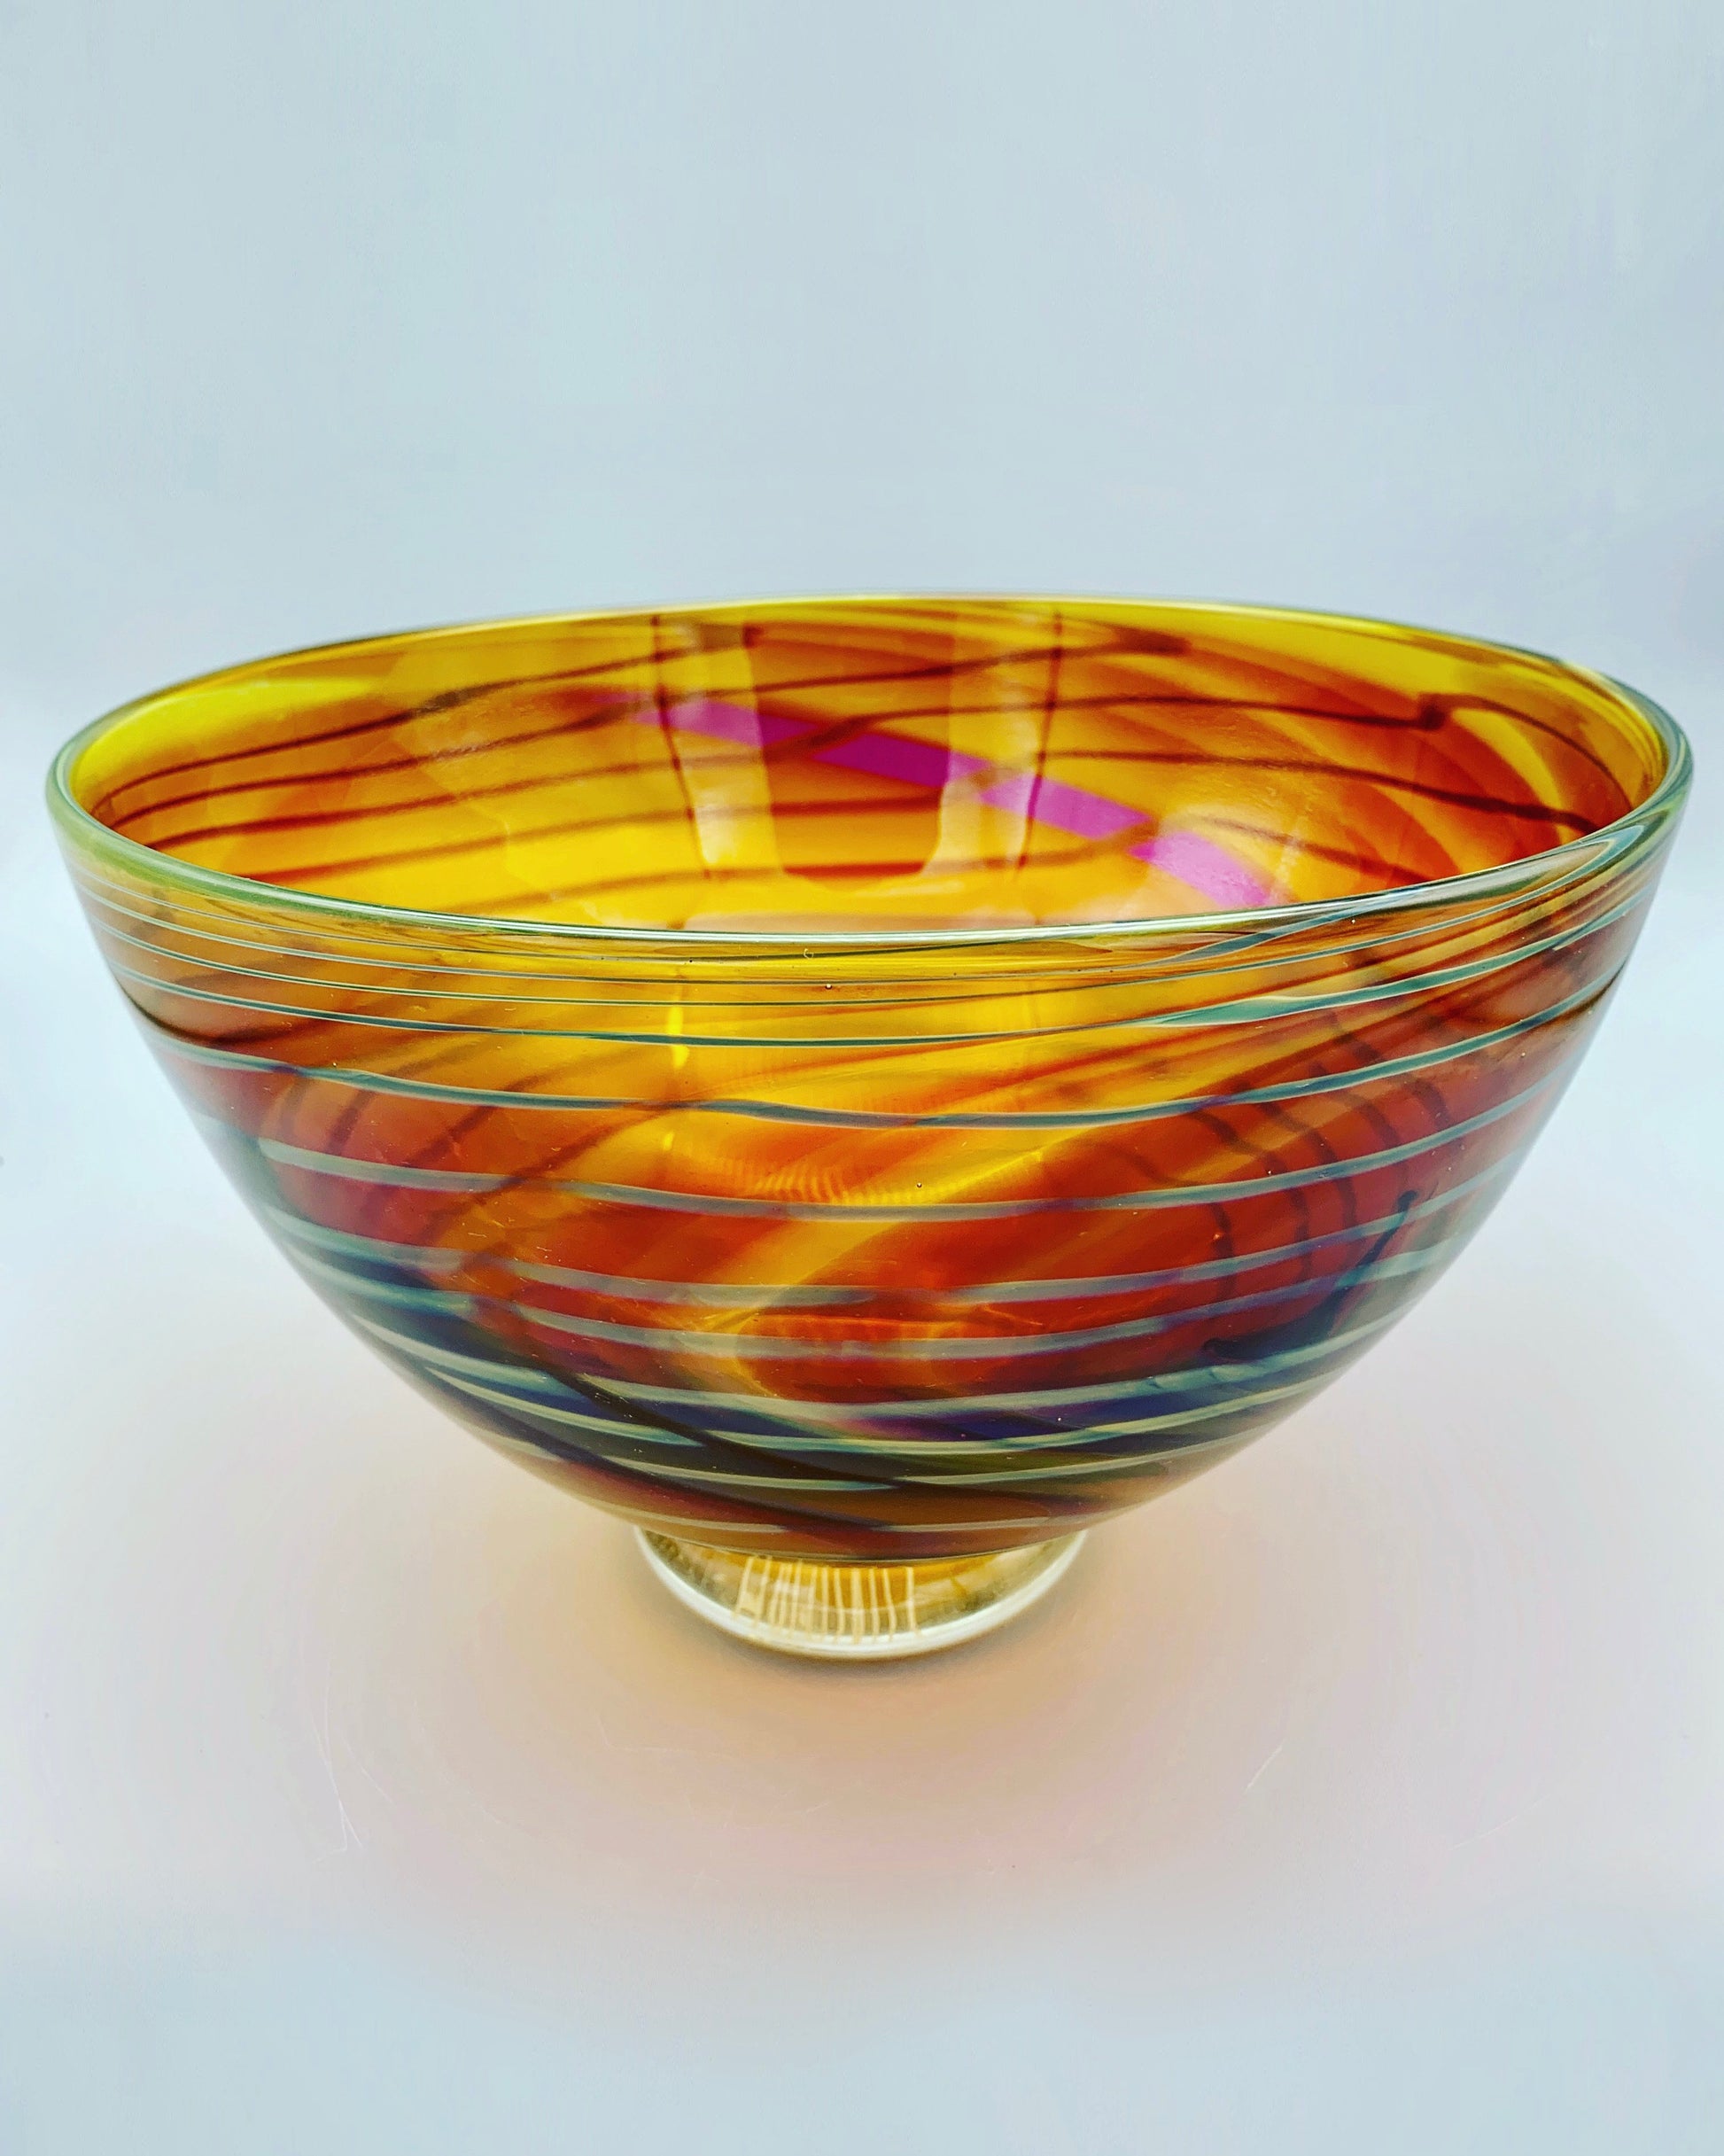 david flower autumn flared footed bowl decorative glass handblown glassware abstract